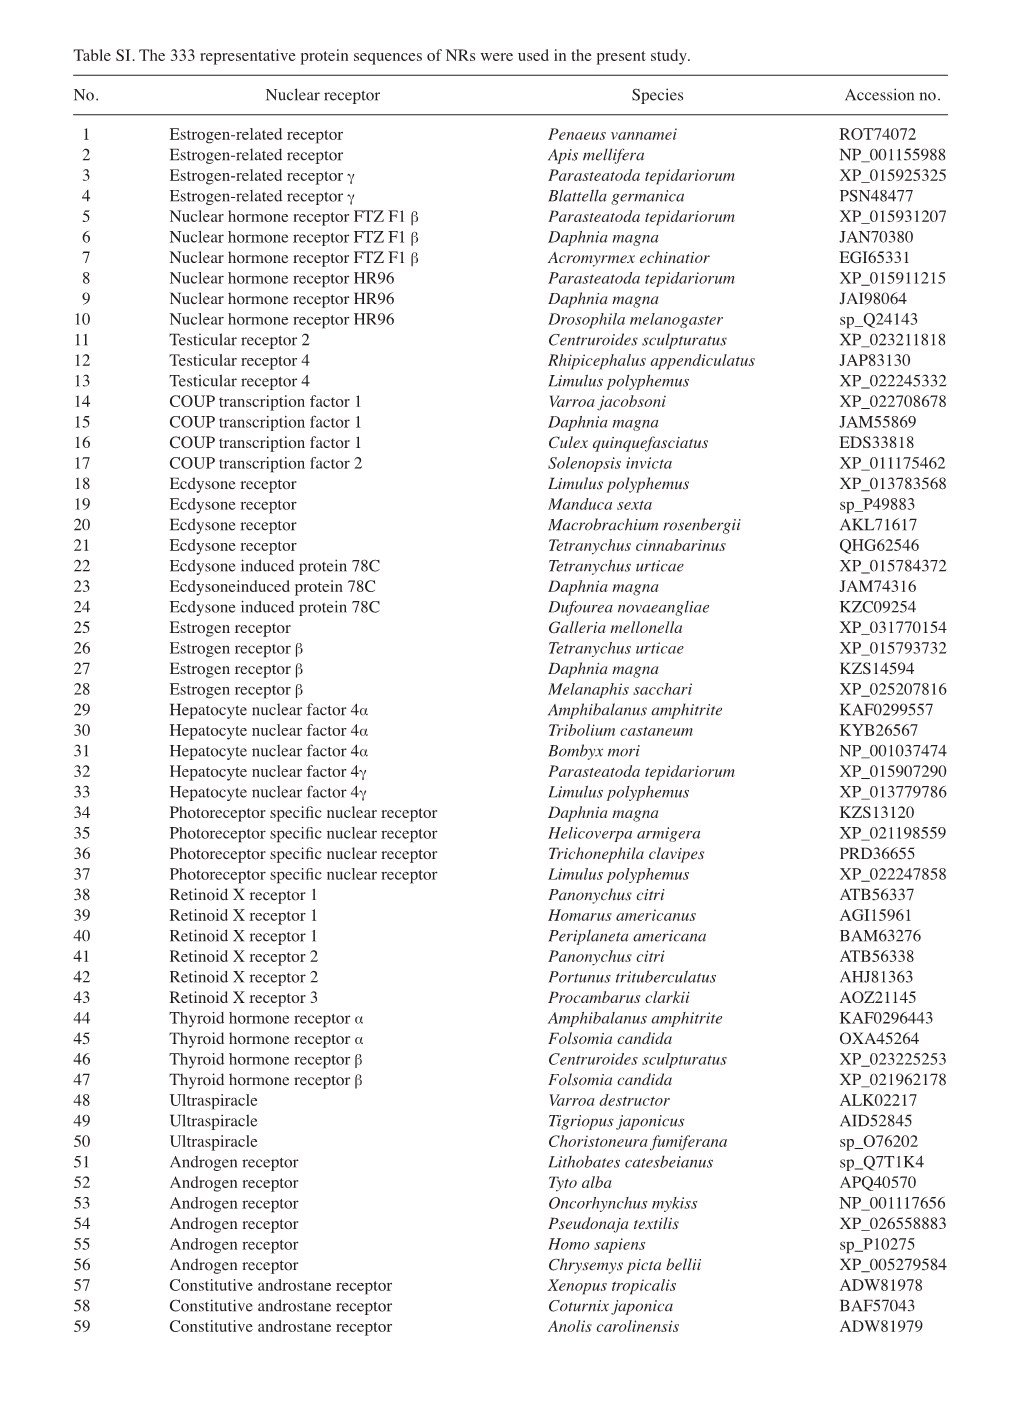 Table SI. the 333 Representative Protein Sequences of Nrs Were Used in the Present Study